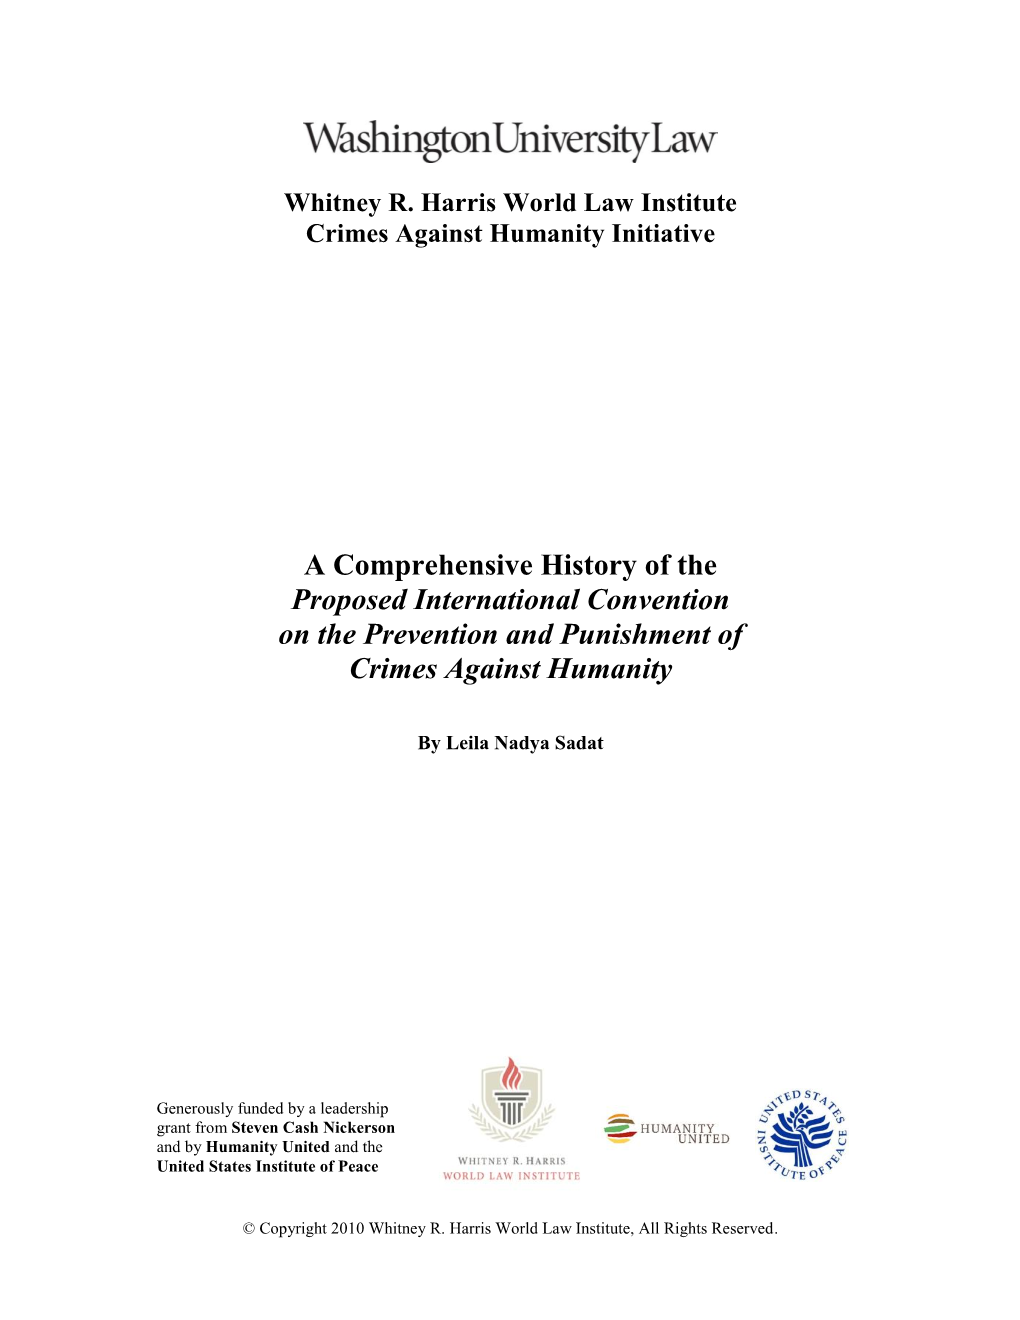 A Comprehensive History of the Proposed International Convention on the Prevention and Punishment of Crimes Against Humanity